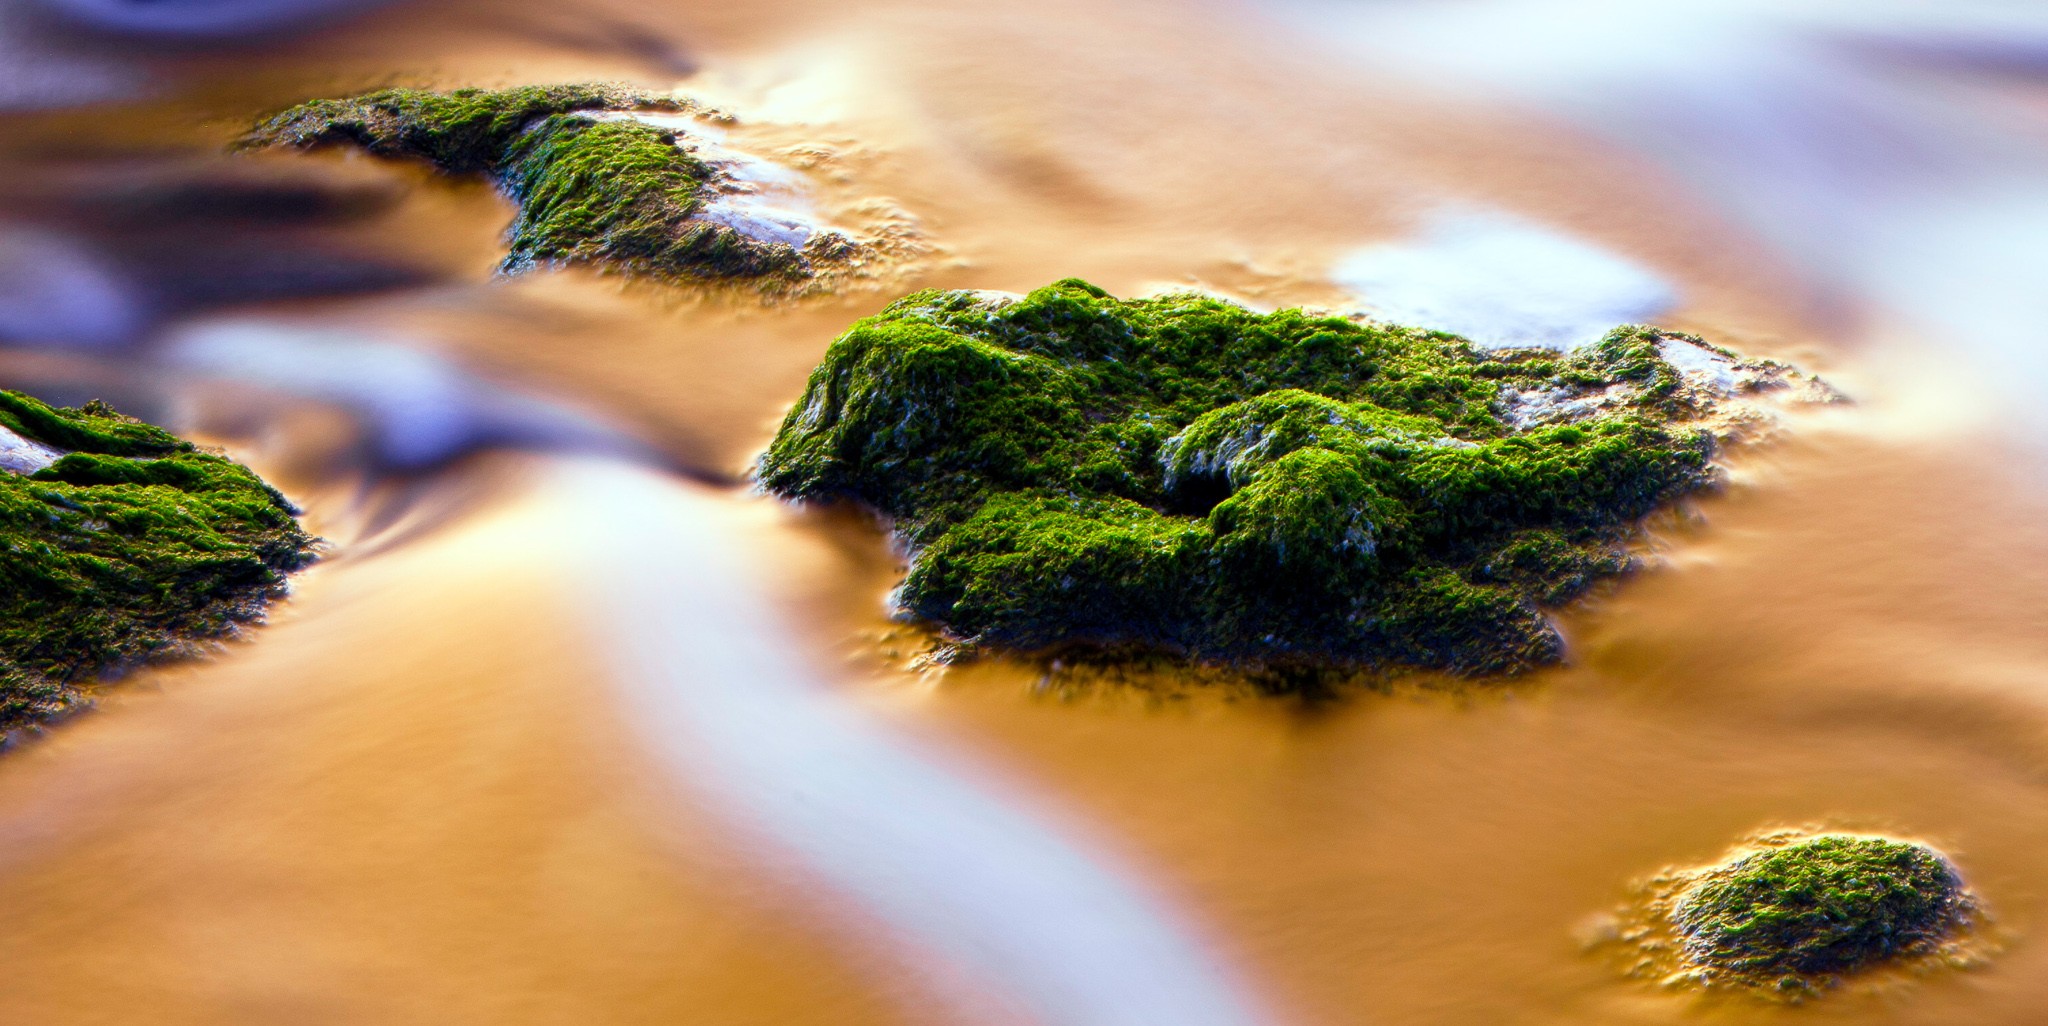 General 2048x1026 nature photography moss rocks water plants